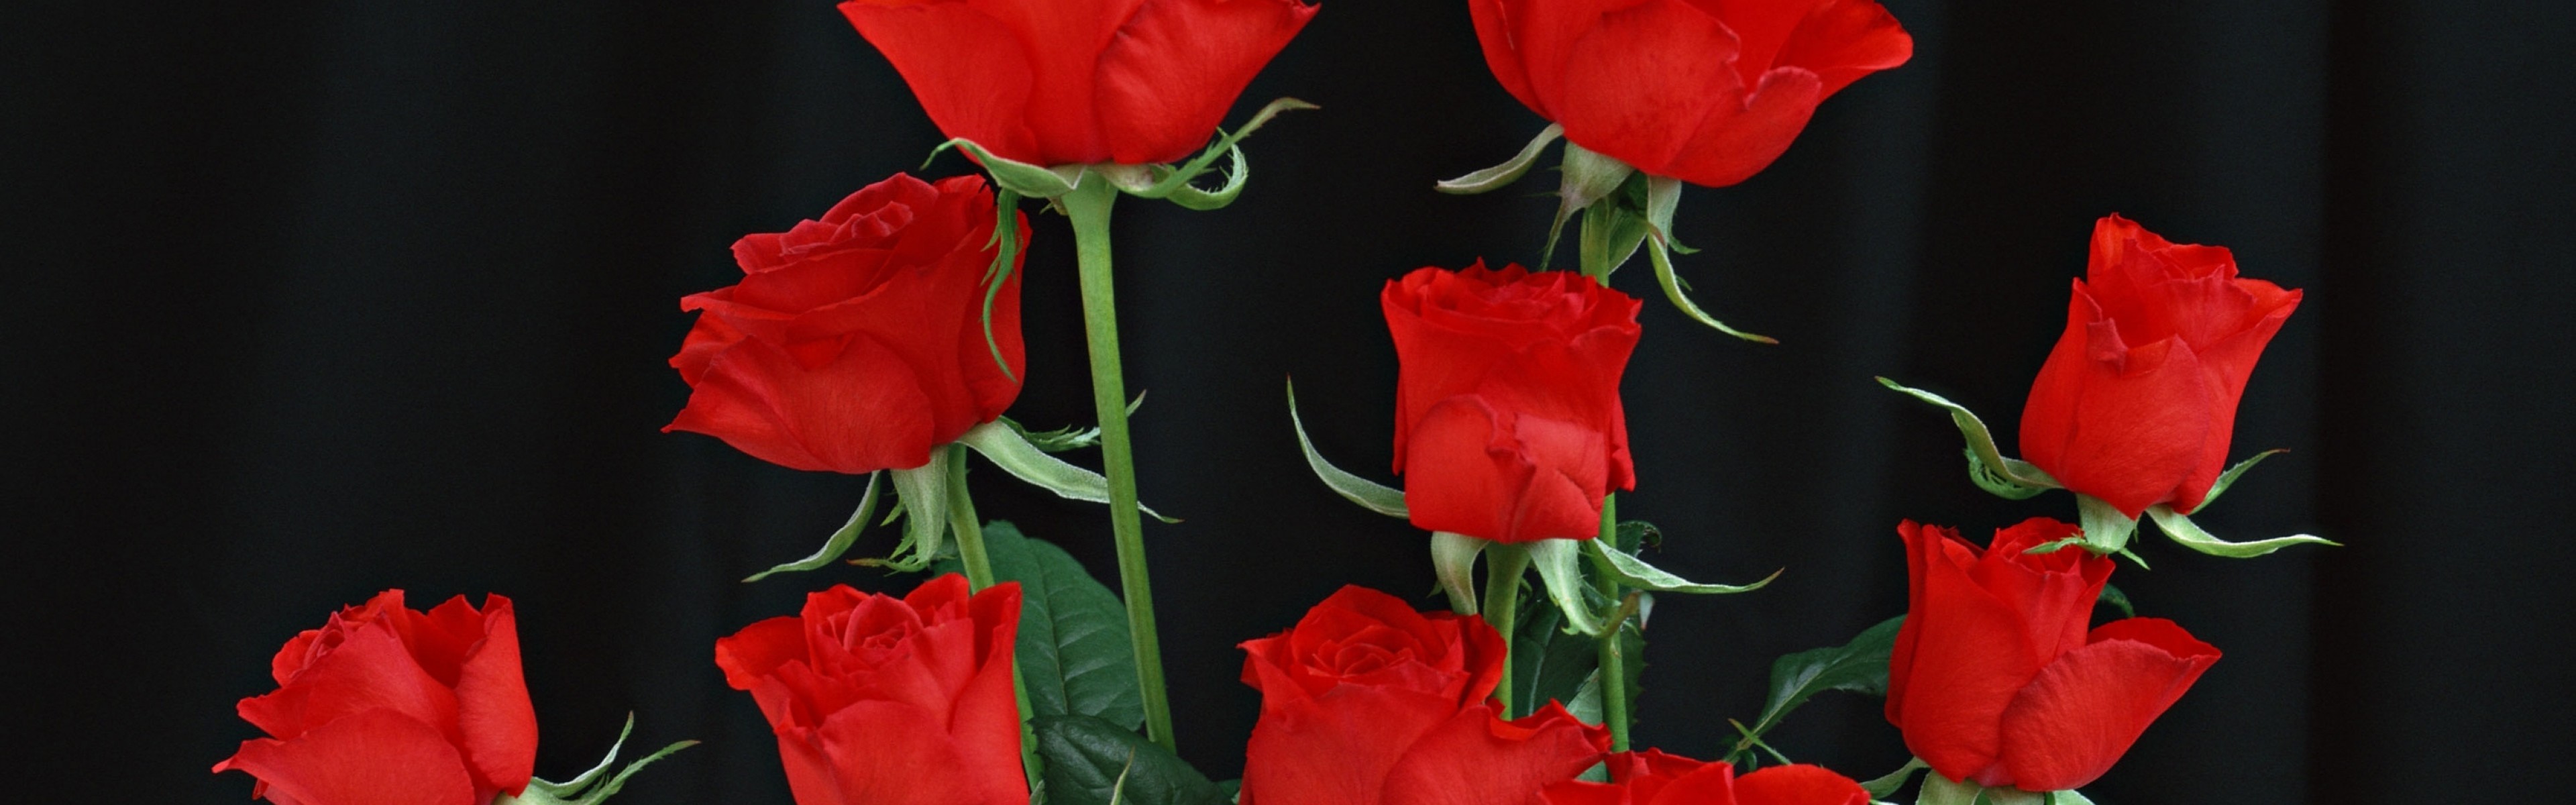 3840x1200  Wallpaper red roses, black background, flowers